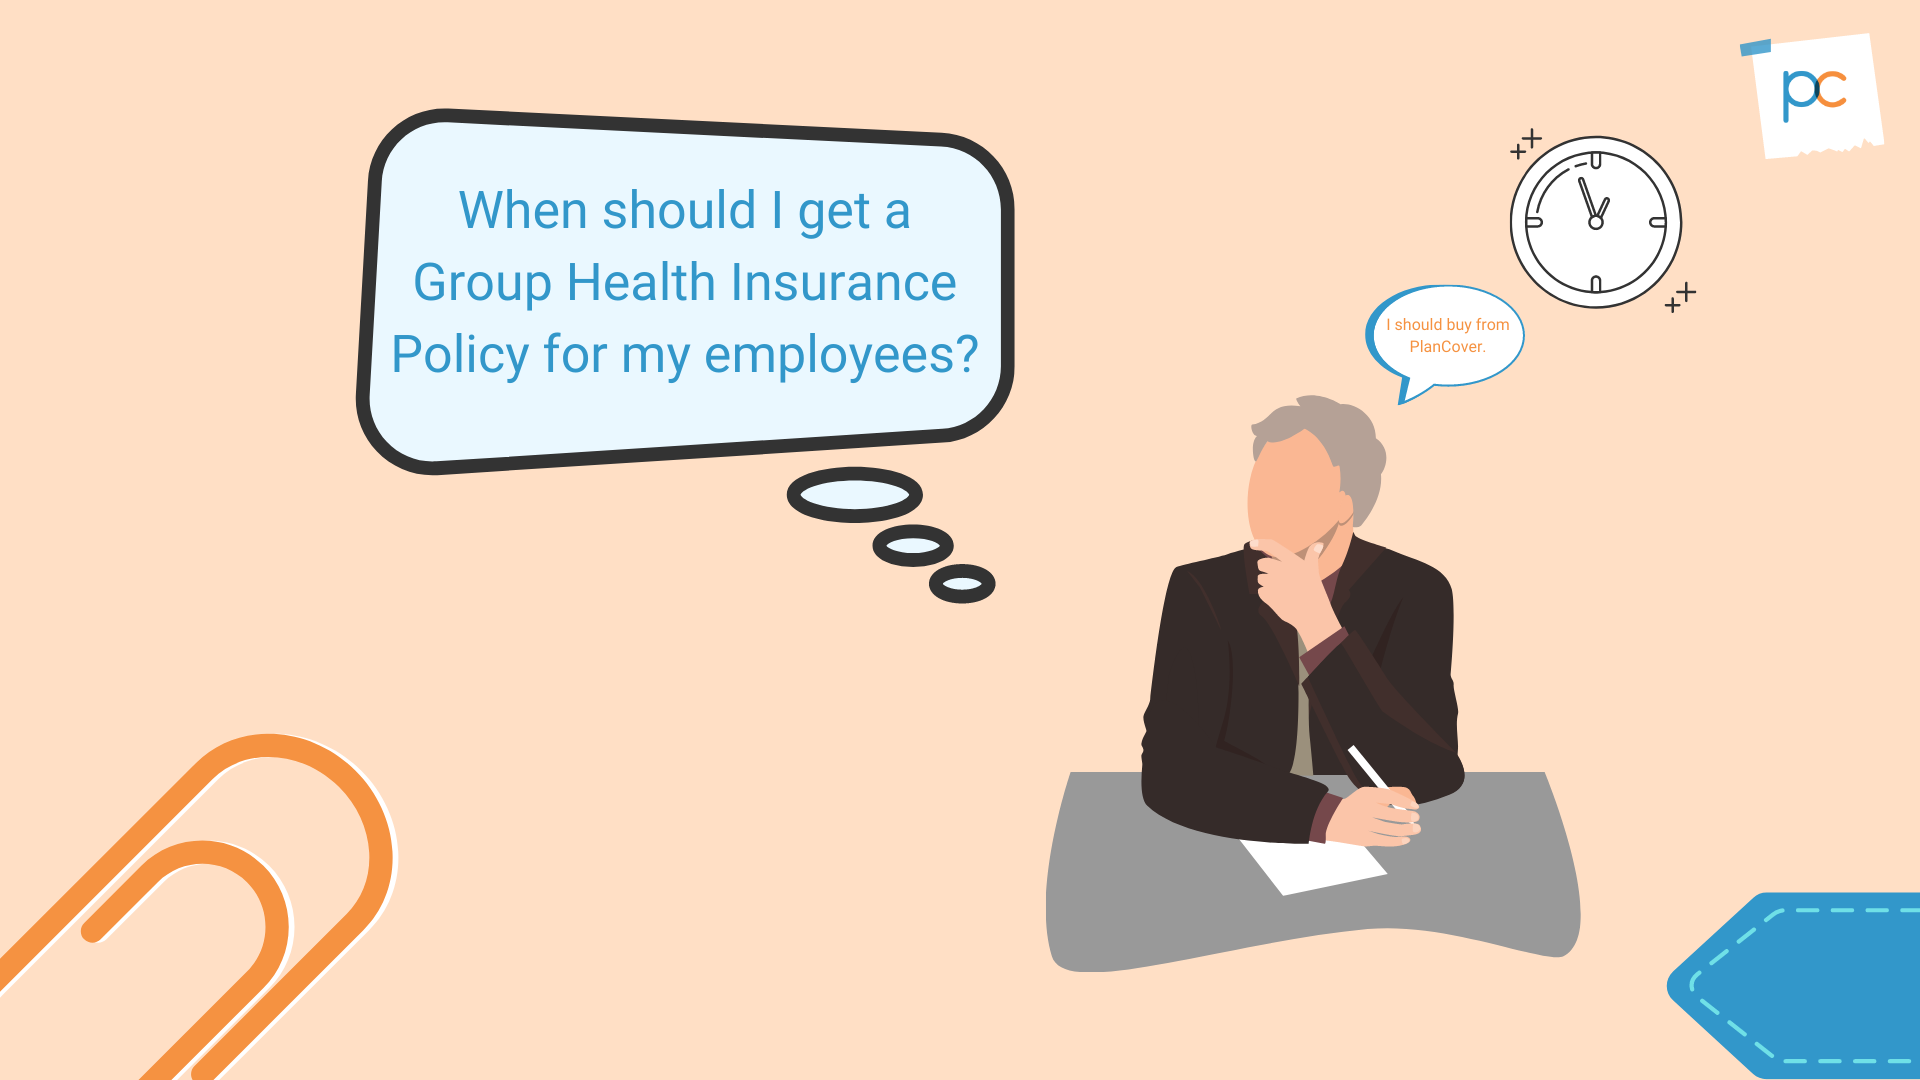 When should I get a Group Health Insurance Policy for my employees